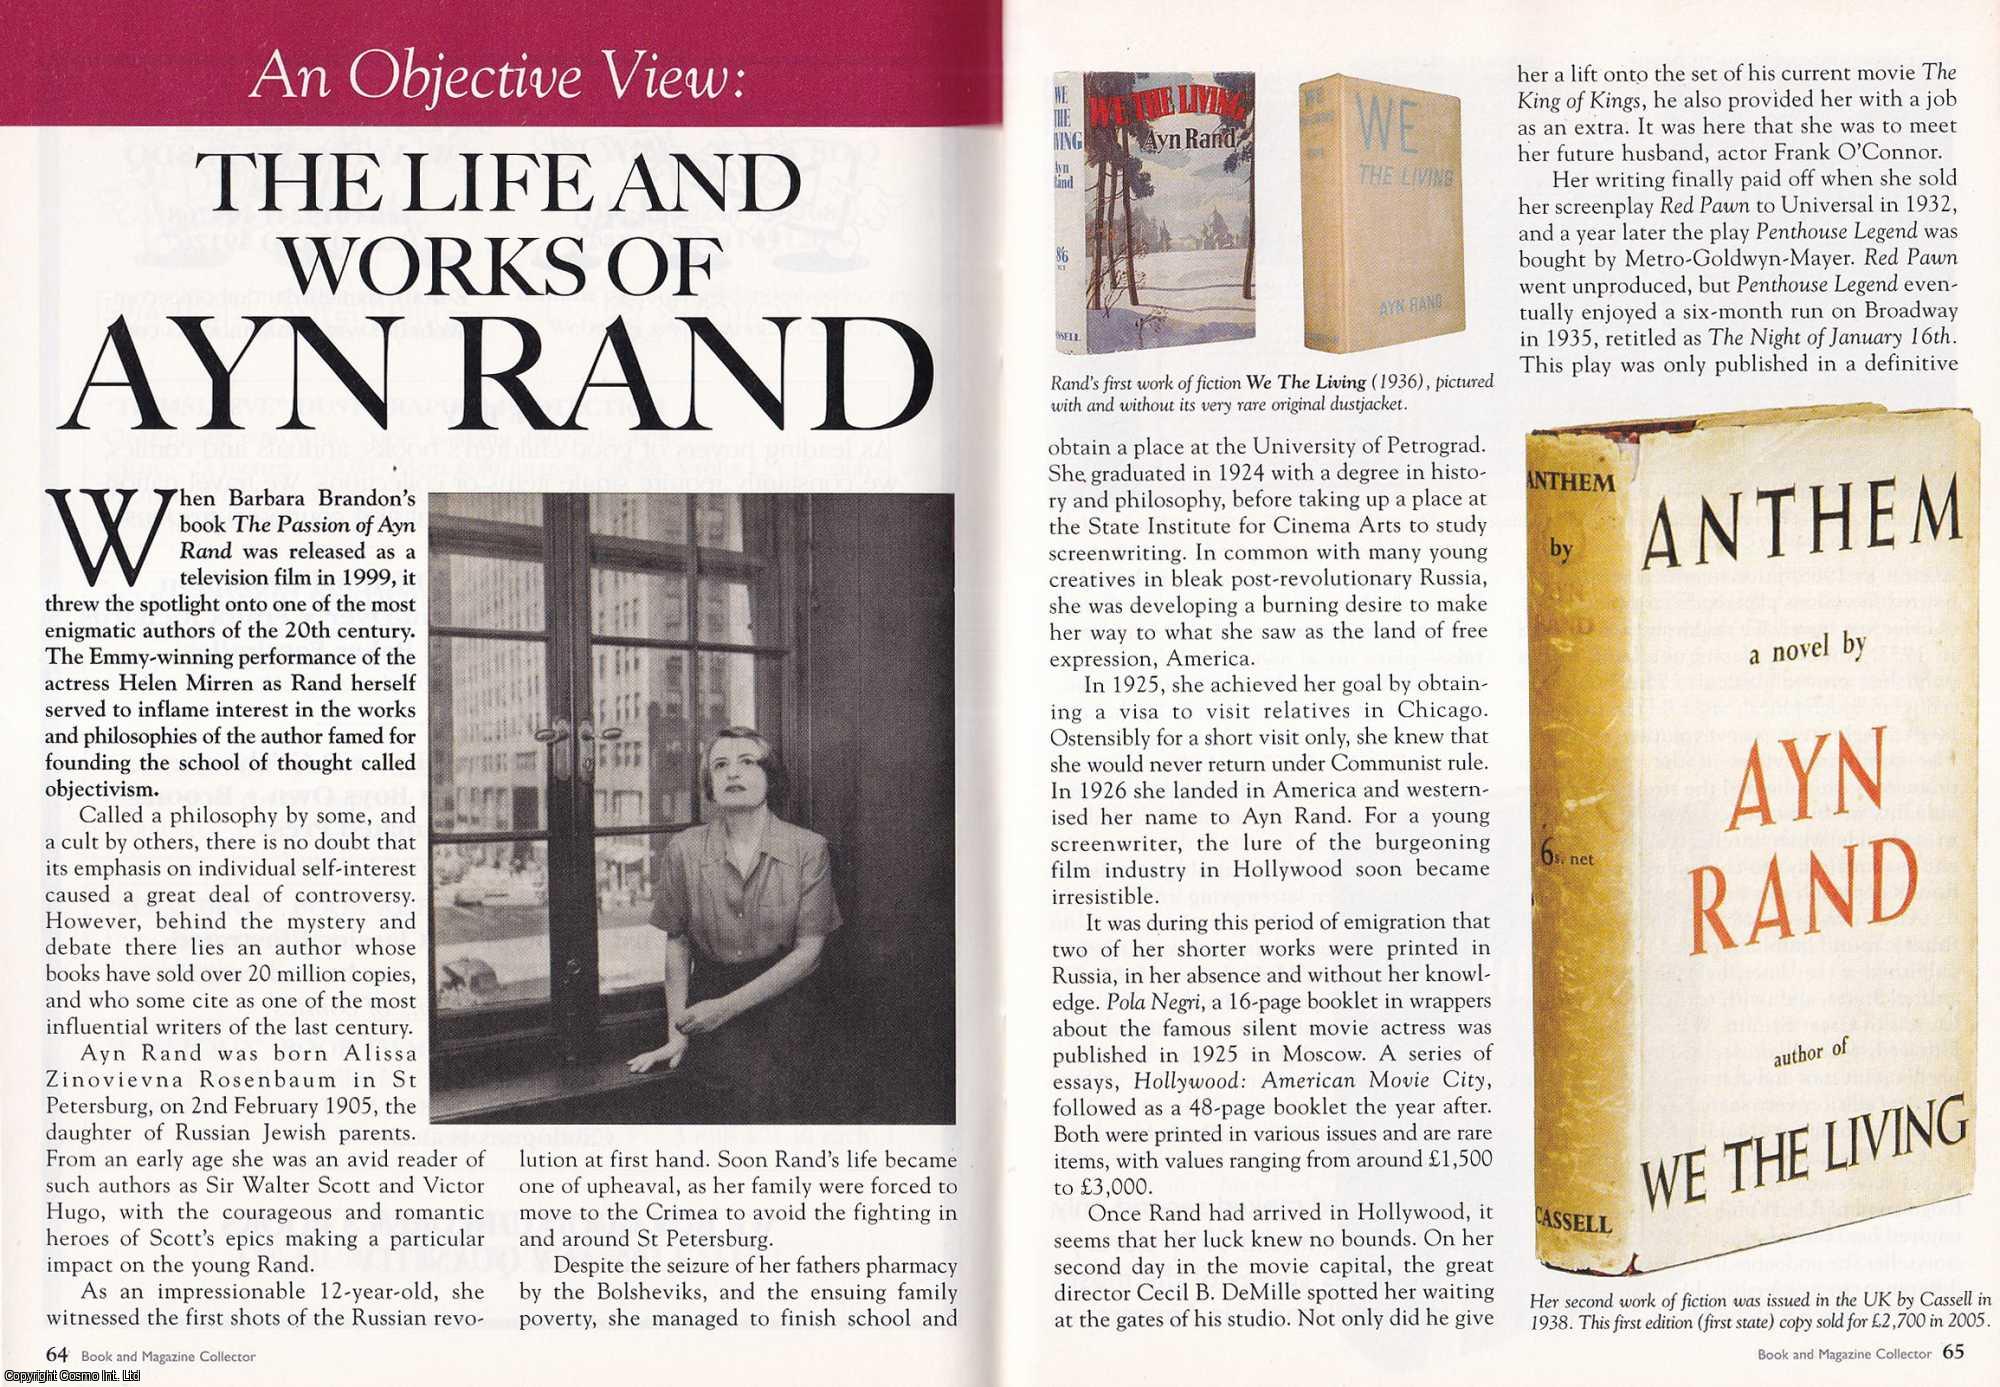 --- - An Objective View. The Life and Works of Ayn Rand. This is an original article separated from an issue of The Book & Magazine Collector publication.